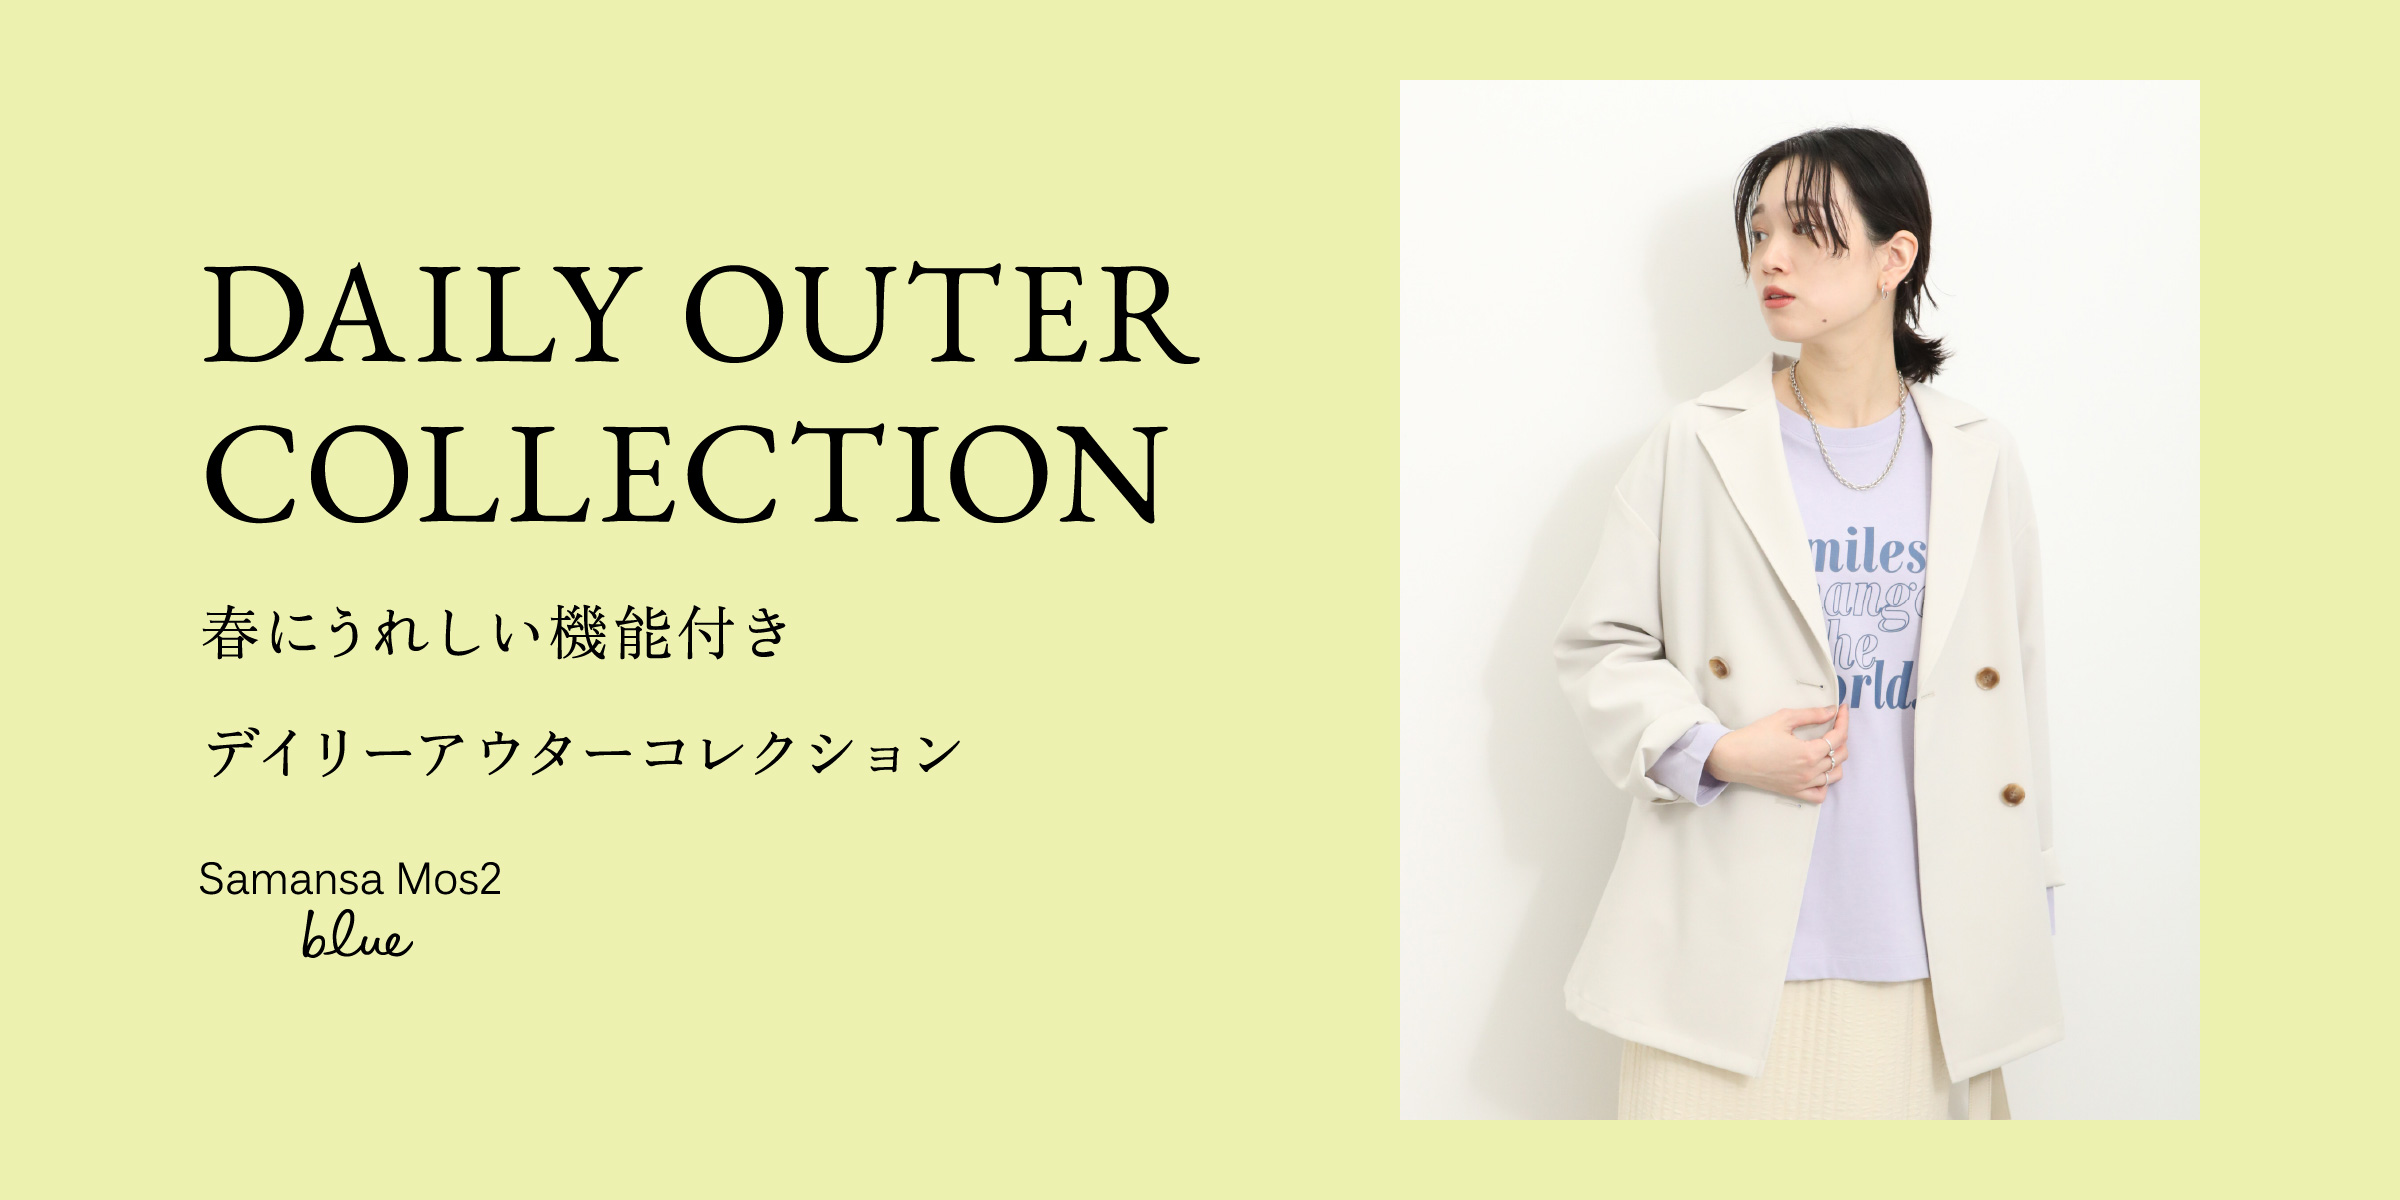 DAILY OUTER COLLECTION 春にうれしい機能付きデイリーアウターコレクション made in INDIA samansaMos2 blue